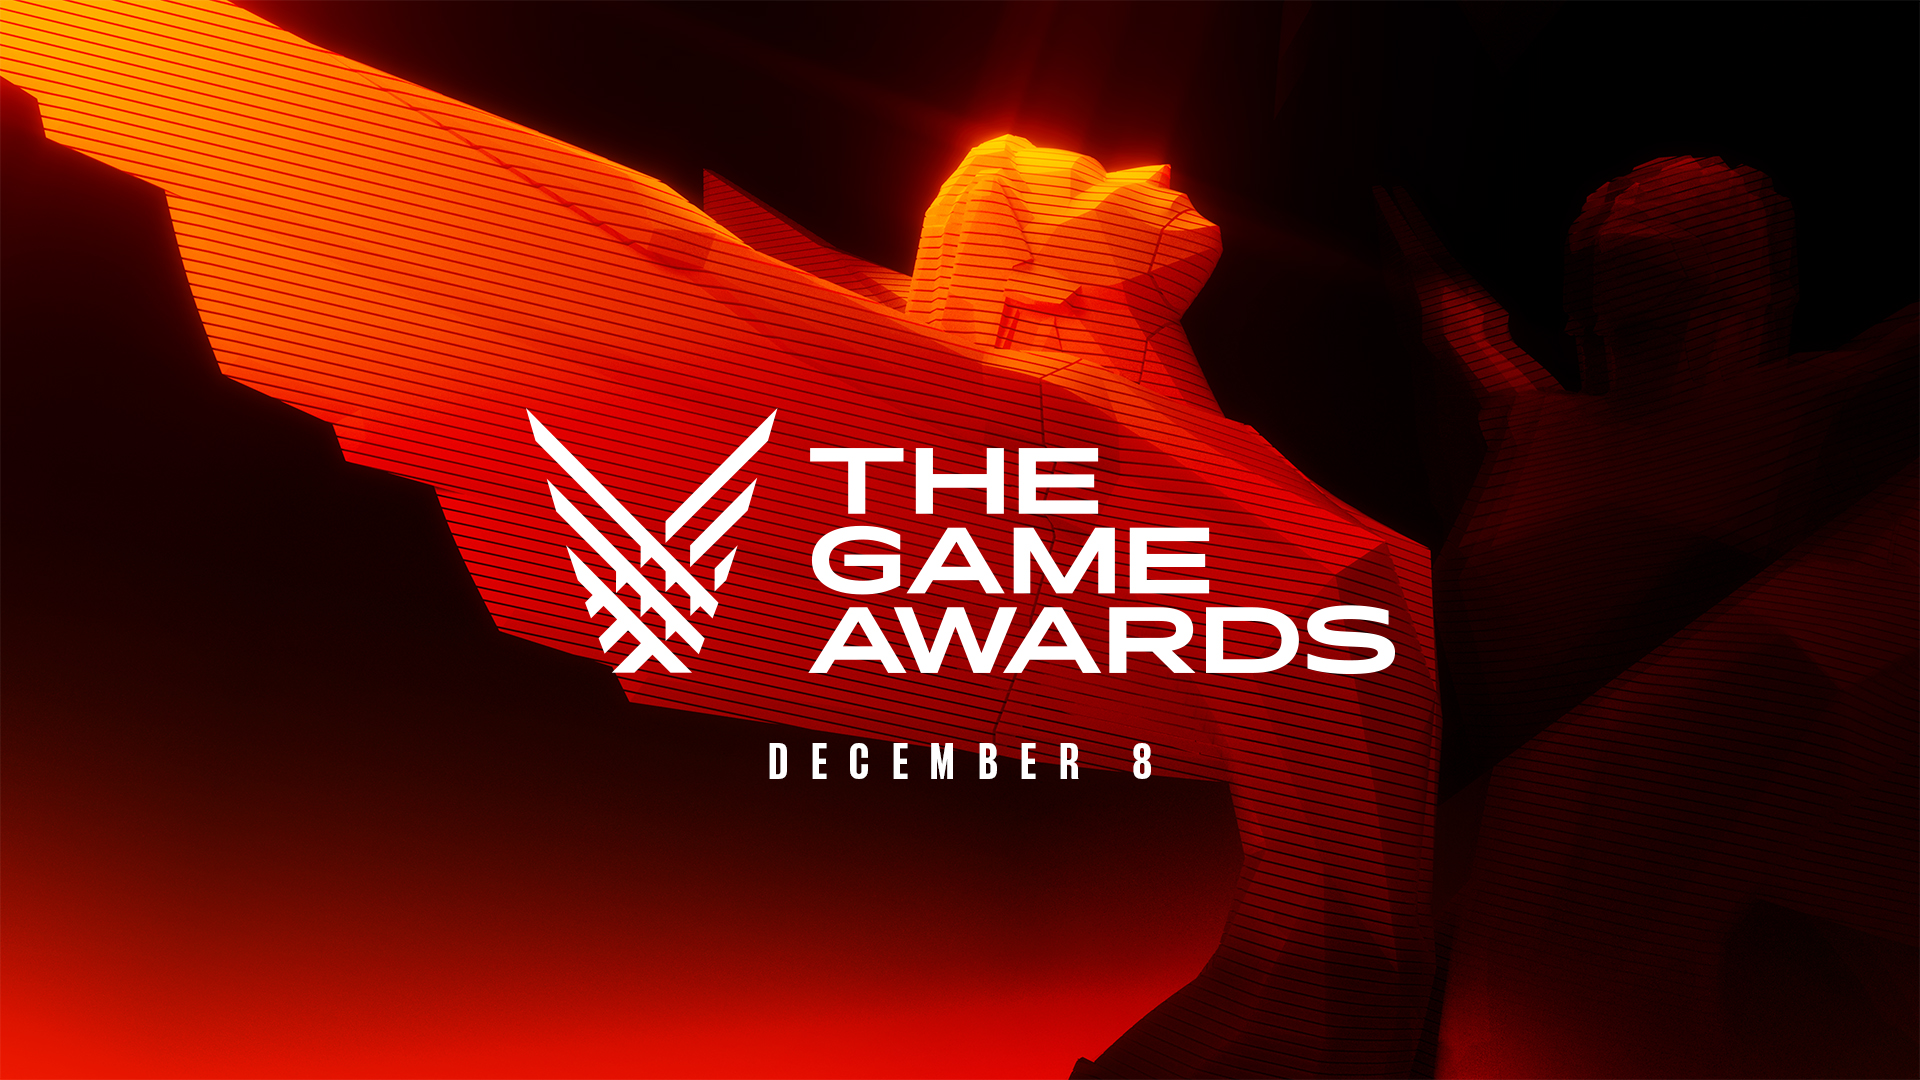 The Game Awards 2018: How to Watch, Categories, Nominees, and more